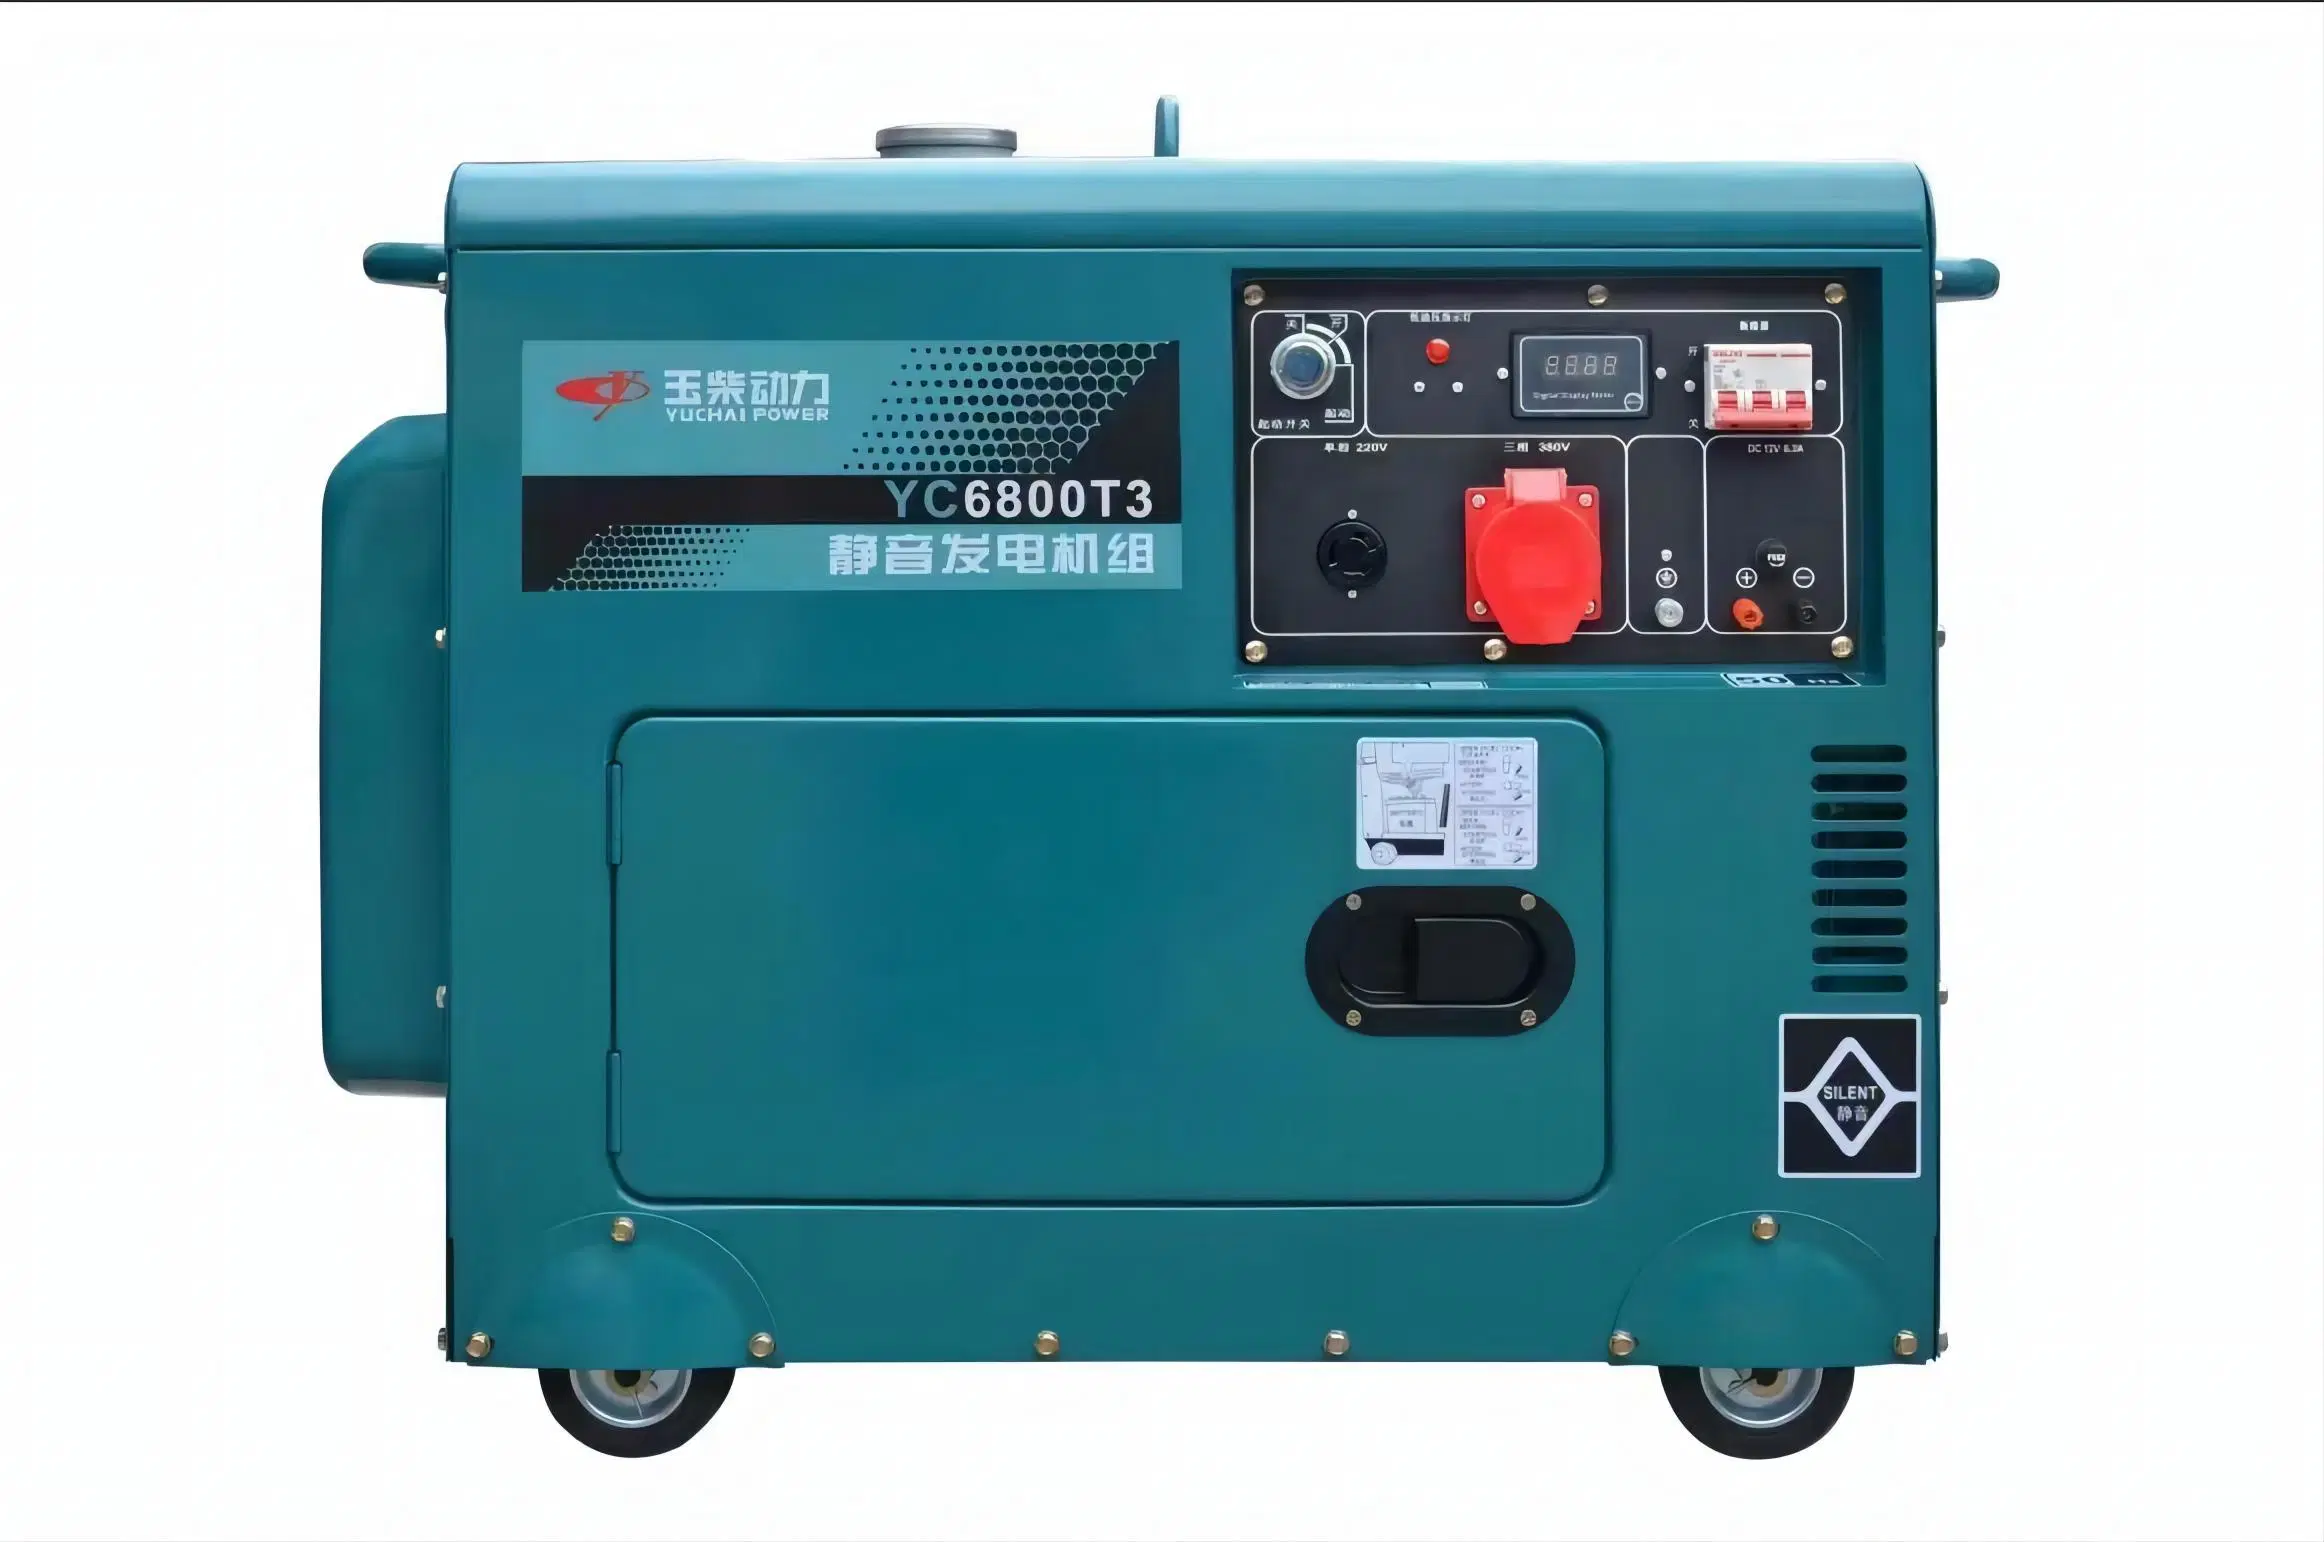 Air Cooled Power Electric Generator Single/Three Phase 4.5kw 6kVA Diesel Generator Silent Portable for Home Restaurant